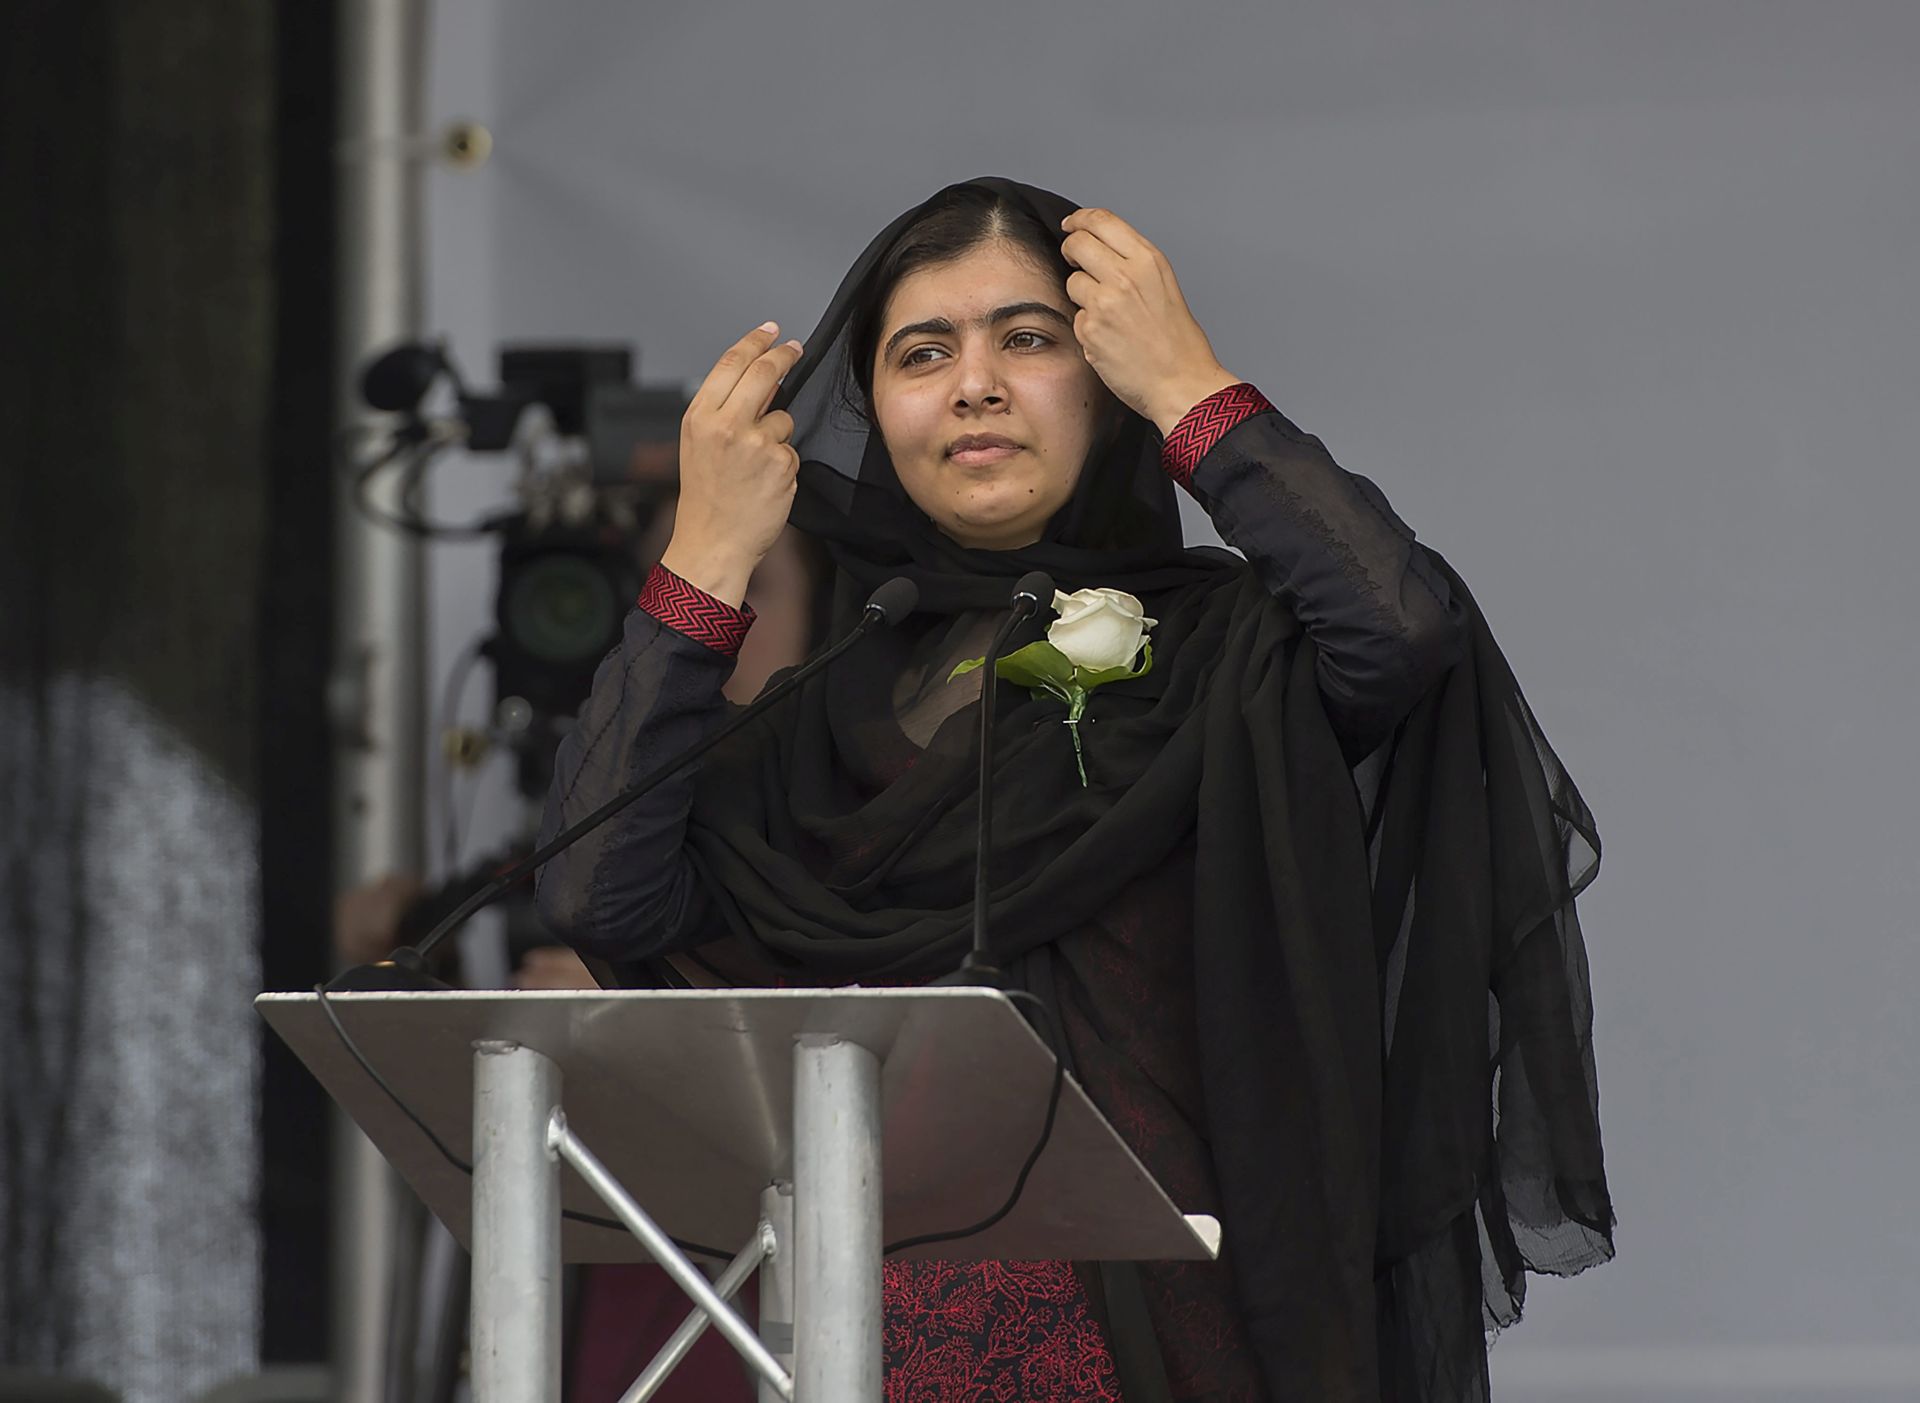 epa05384006 Pakistani activist for female education and Nobel Peace Prize laureate Malala Yousafzai speaks at a memorial for British Labour party MP Jo Cox in Trafalgar Square, London, Britain, 22 June 2016. Cox was murdered in Birstall, West Yorkshire, 16 June 2016, whilst meeting members of the public in her constituency.  EPA/HANNAH MCKAY